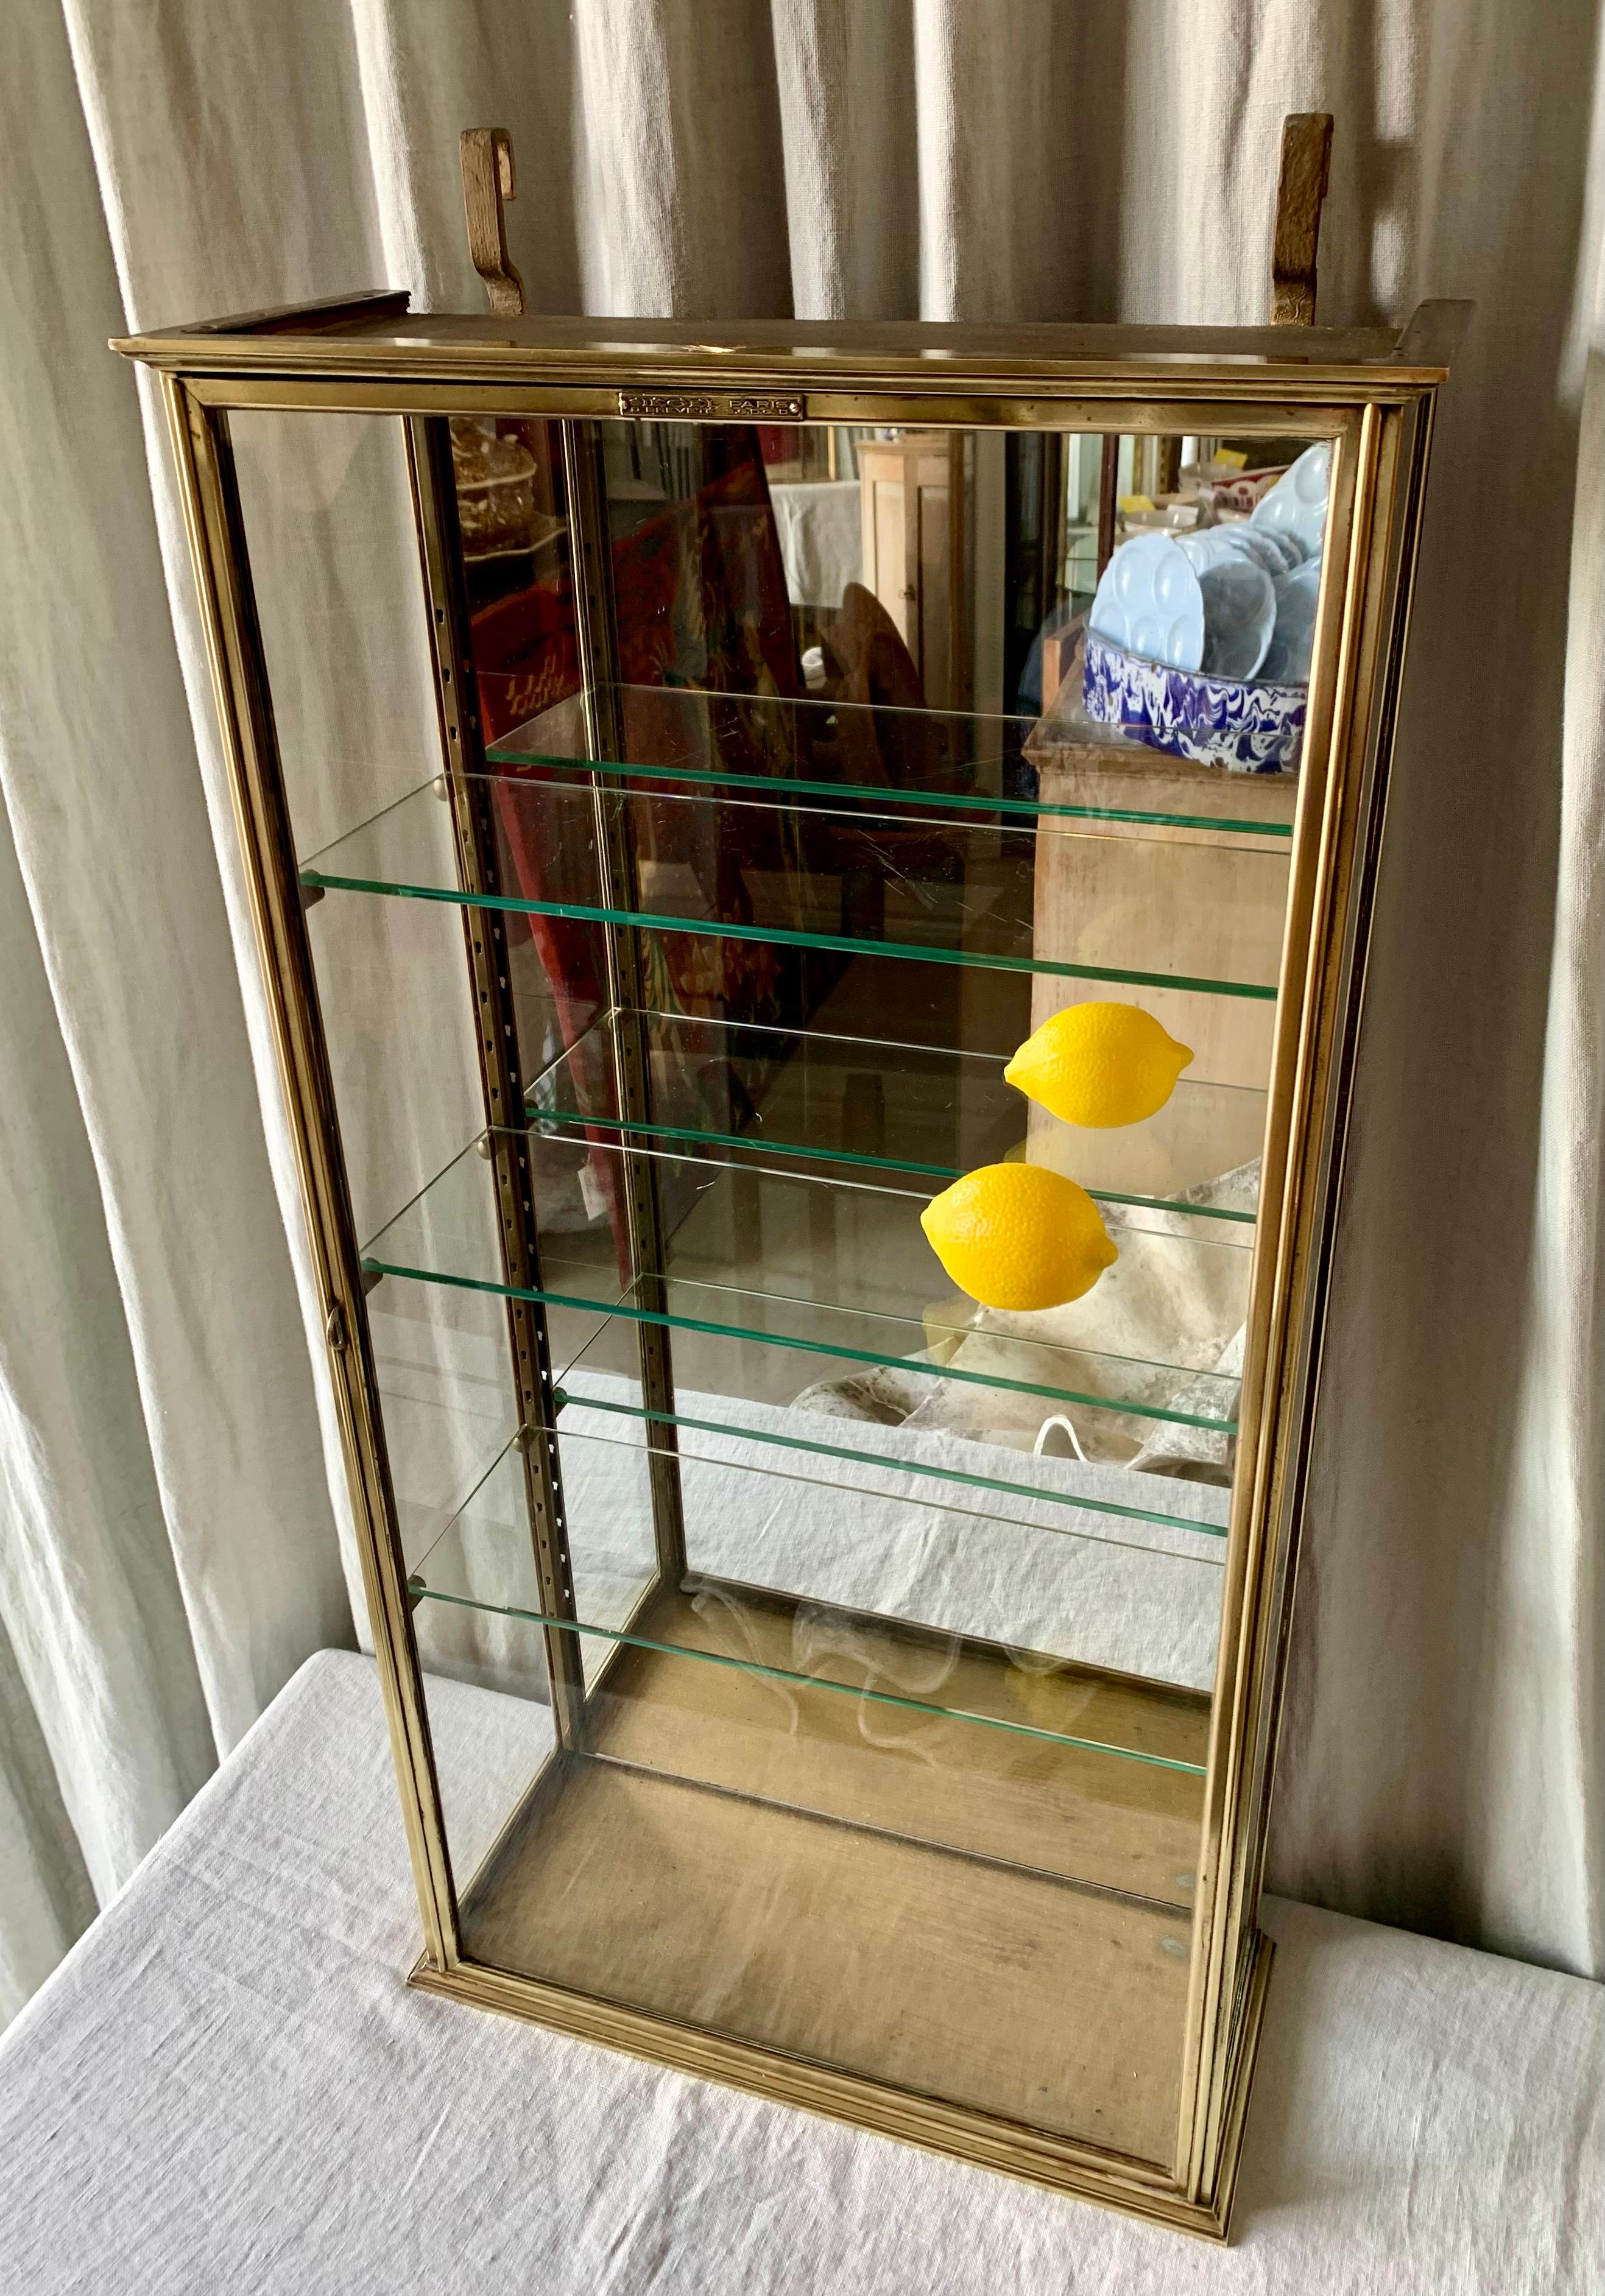 Antique French brass display cabinet or vitrine for hanging on the wall. The cabinet has perfect patina according to its age and used to serve as a display for tobacco, perfume etc. in a shop. A nice cabinet for the kitchen, bathroom or dressing